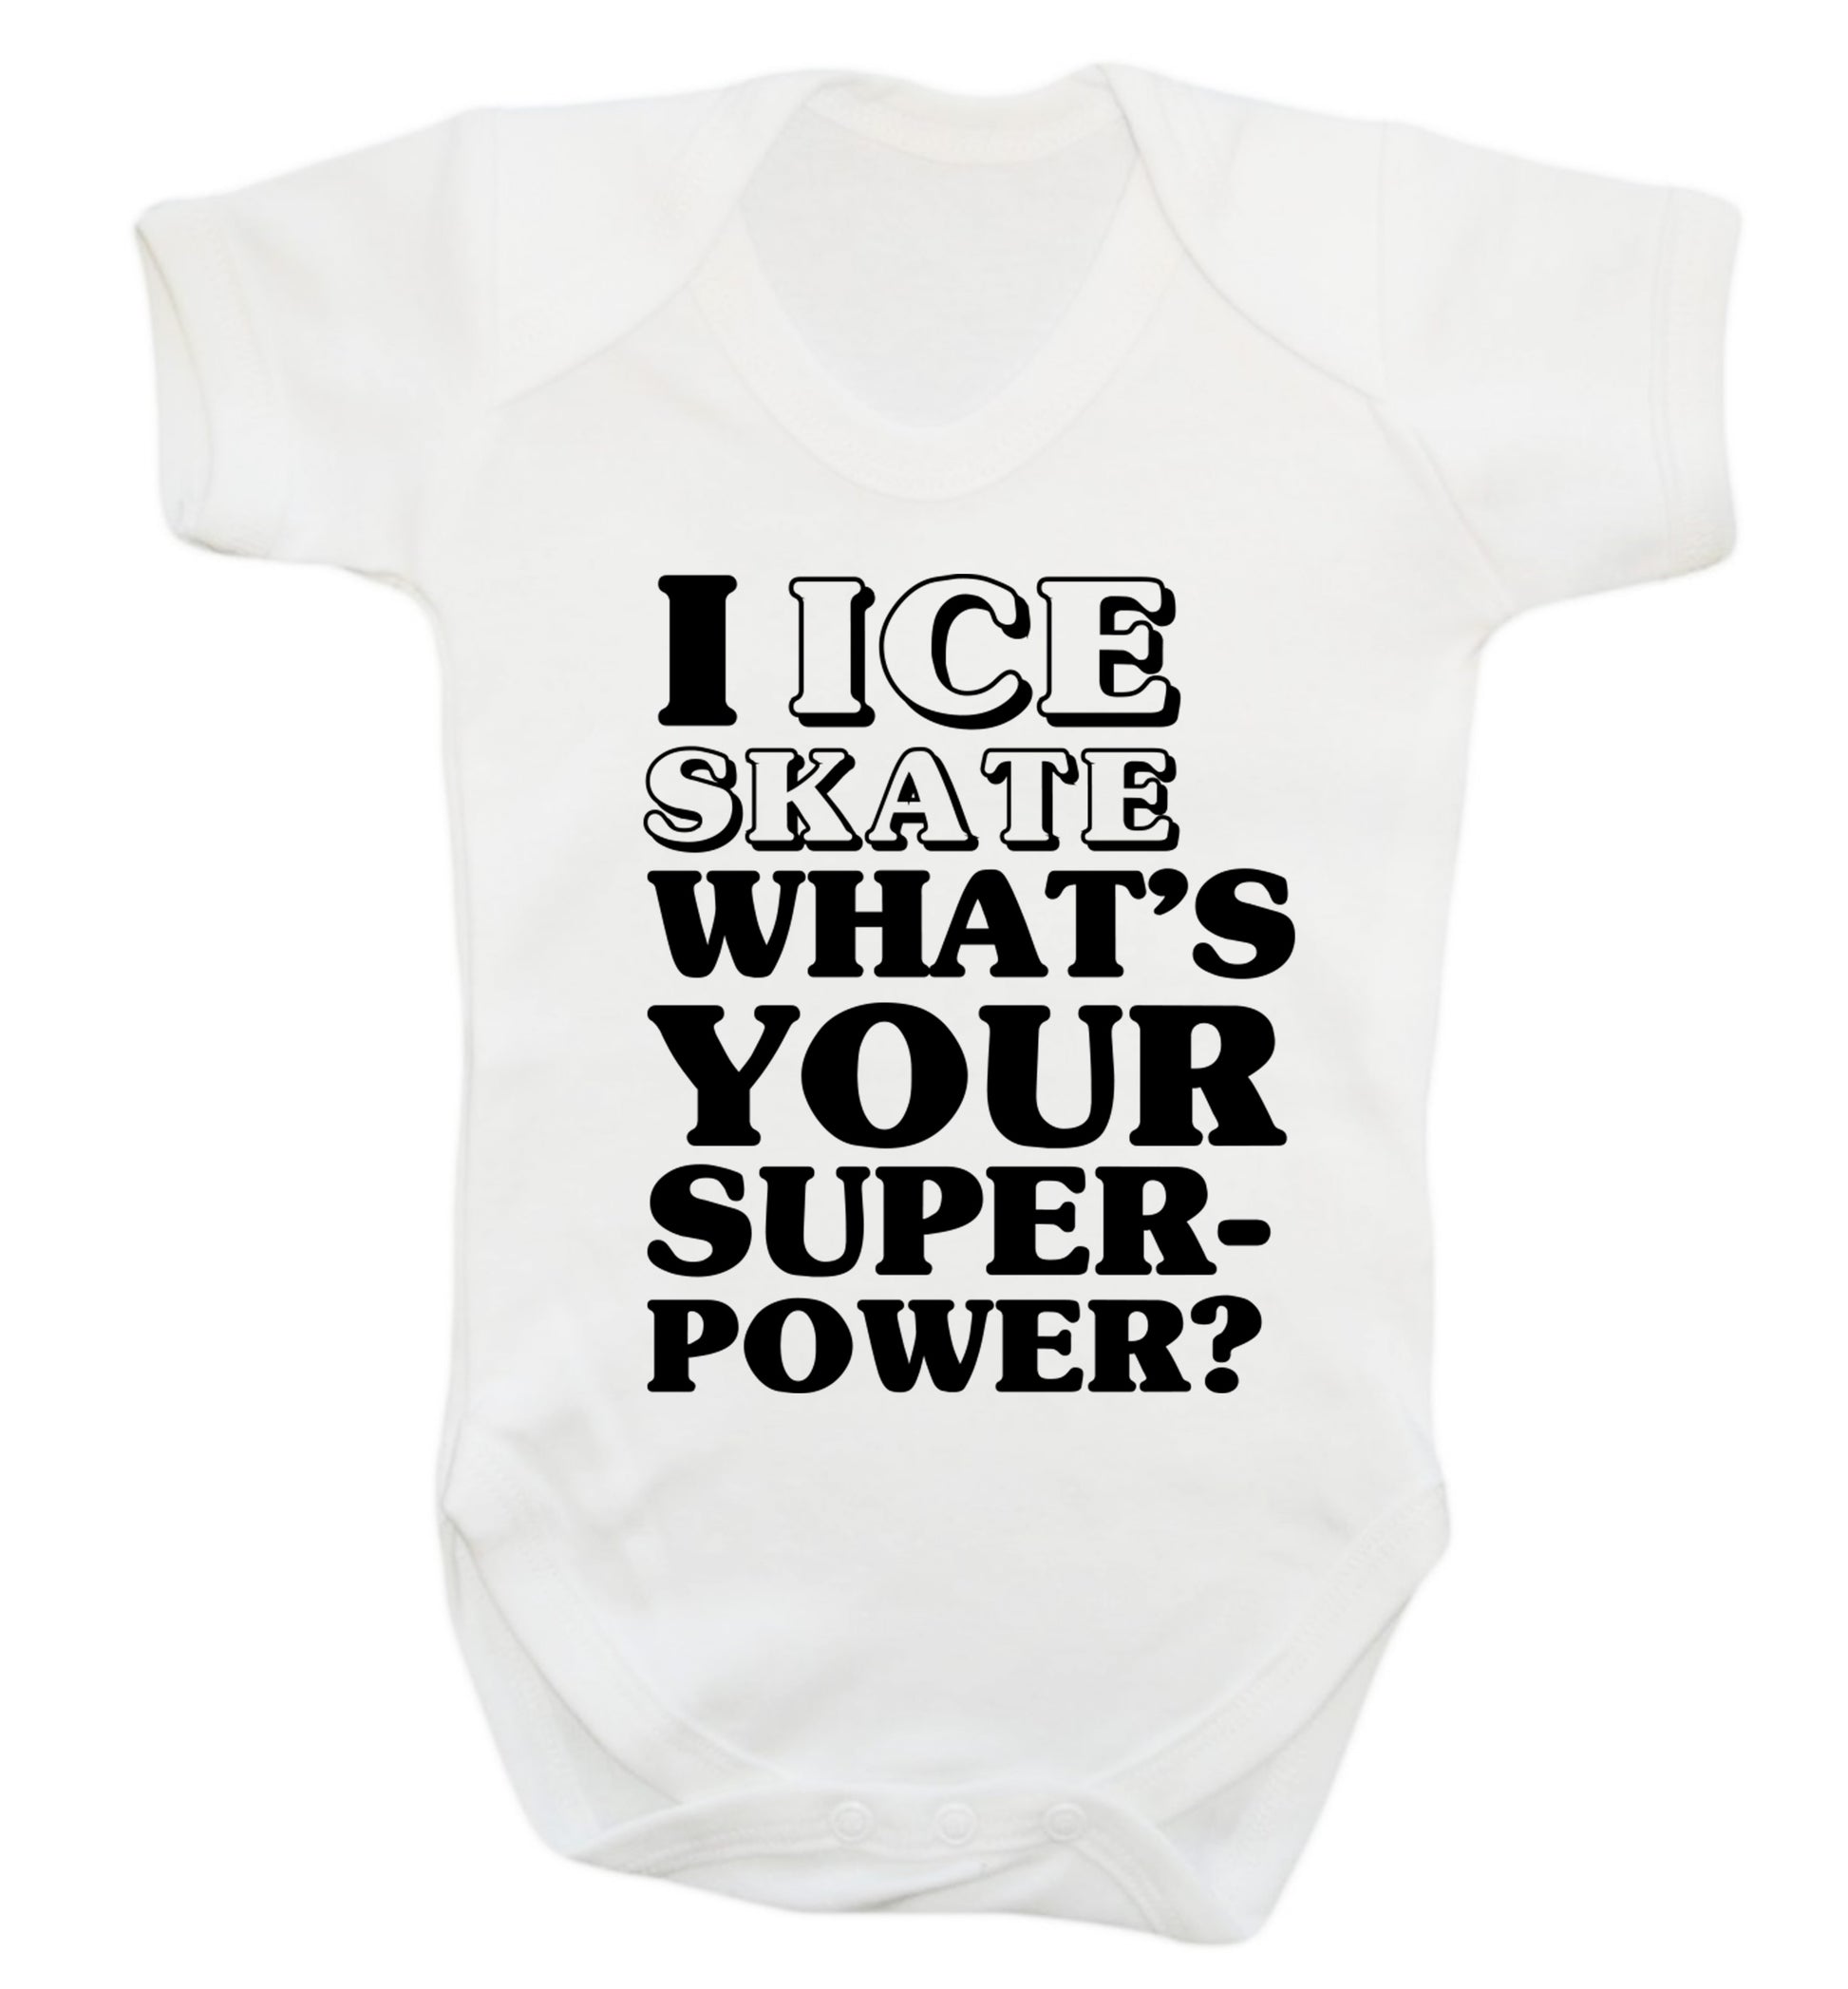 I ice skate what's your superpower? Baby Vest white 18-24 months